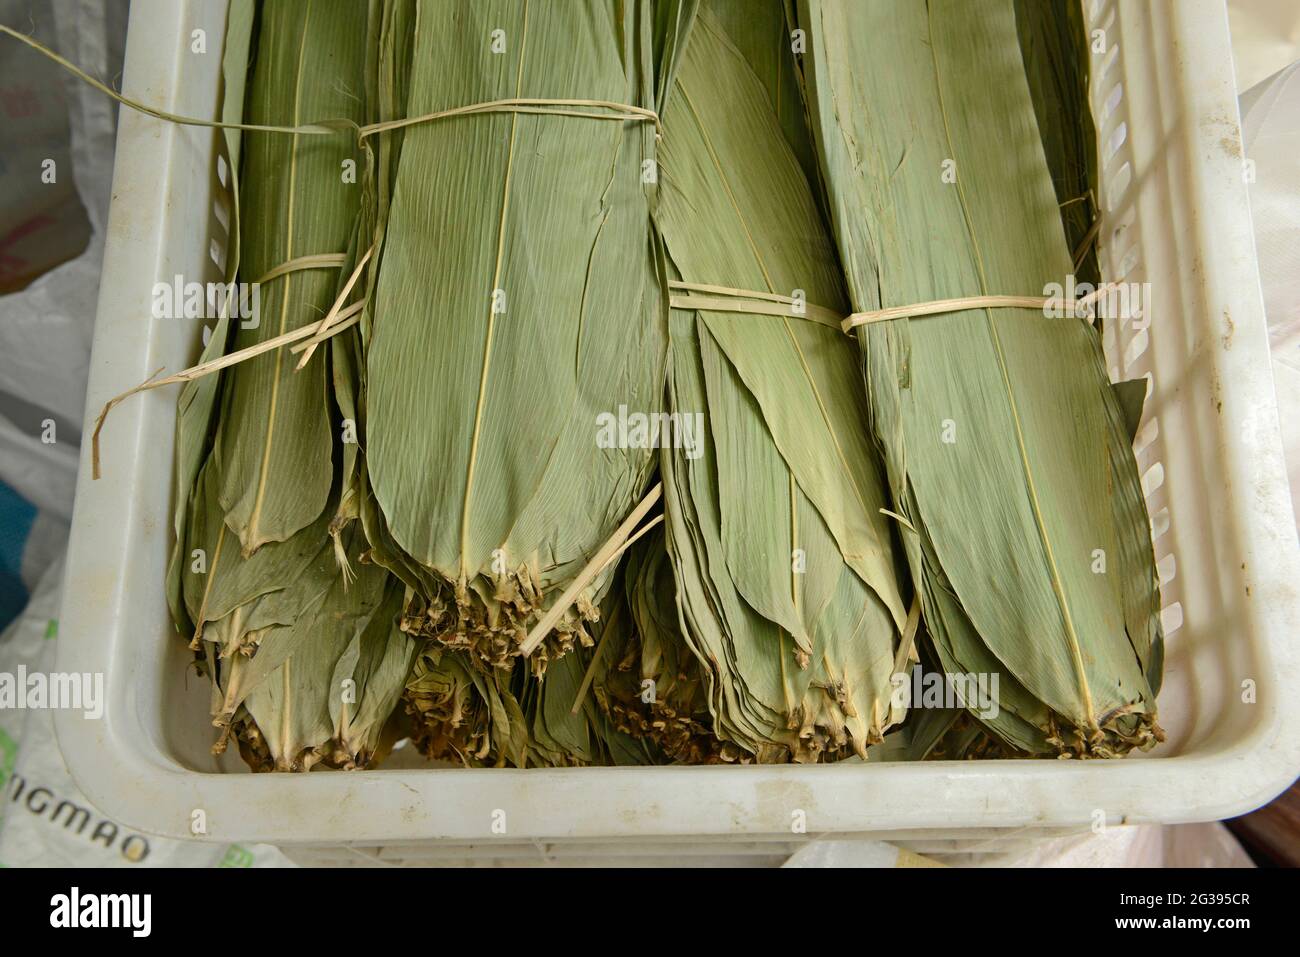 Bundles of dry Dendrocalamus bamboo leaves on sale at a food products market in Yantai, Shandong province, China, to be used to wrap Zongzi dumplings. Stock Photo